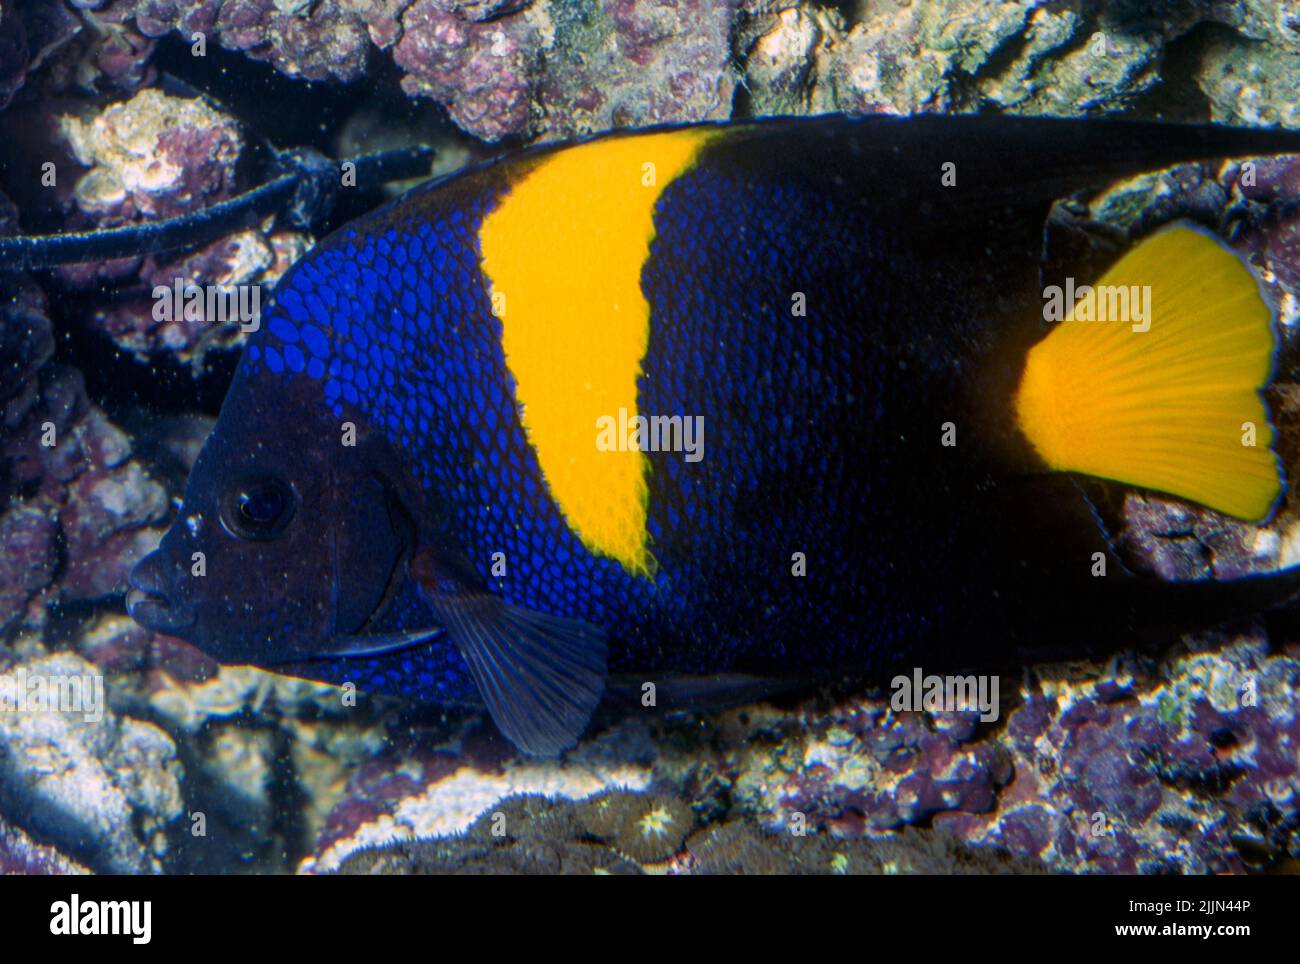 Angelfish (Pomacanthus maculosus). Banque D'Images